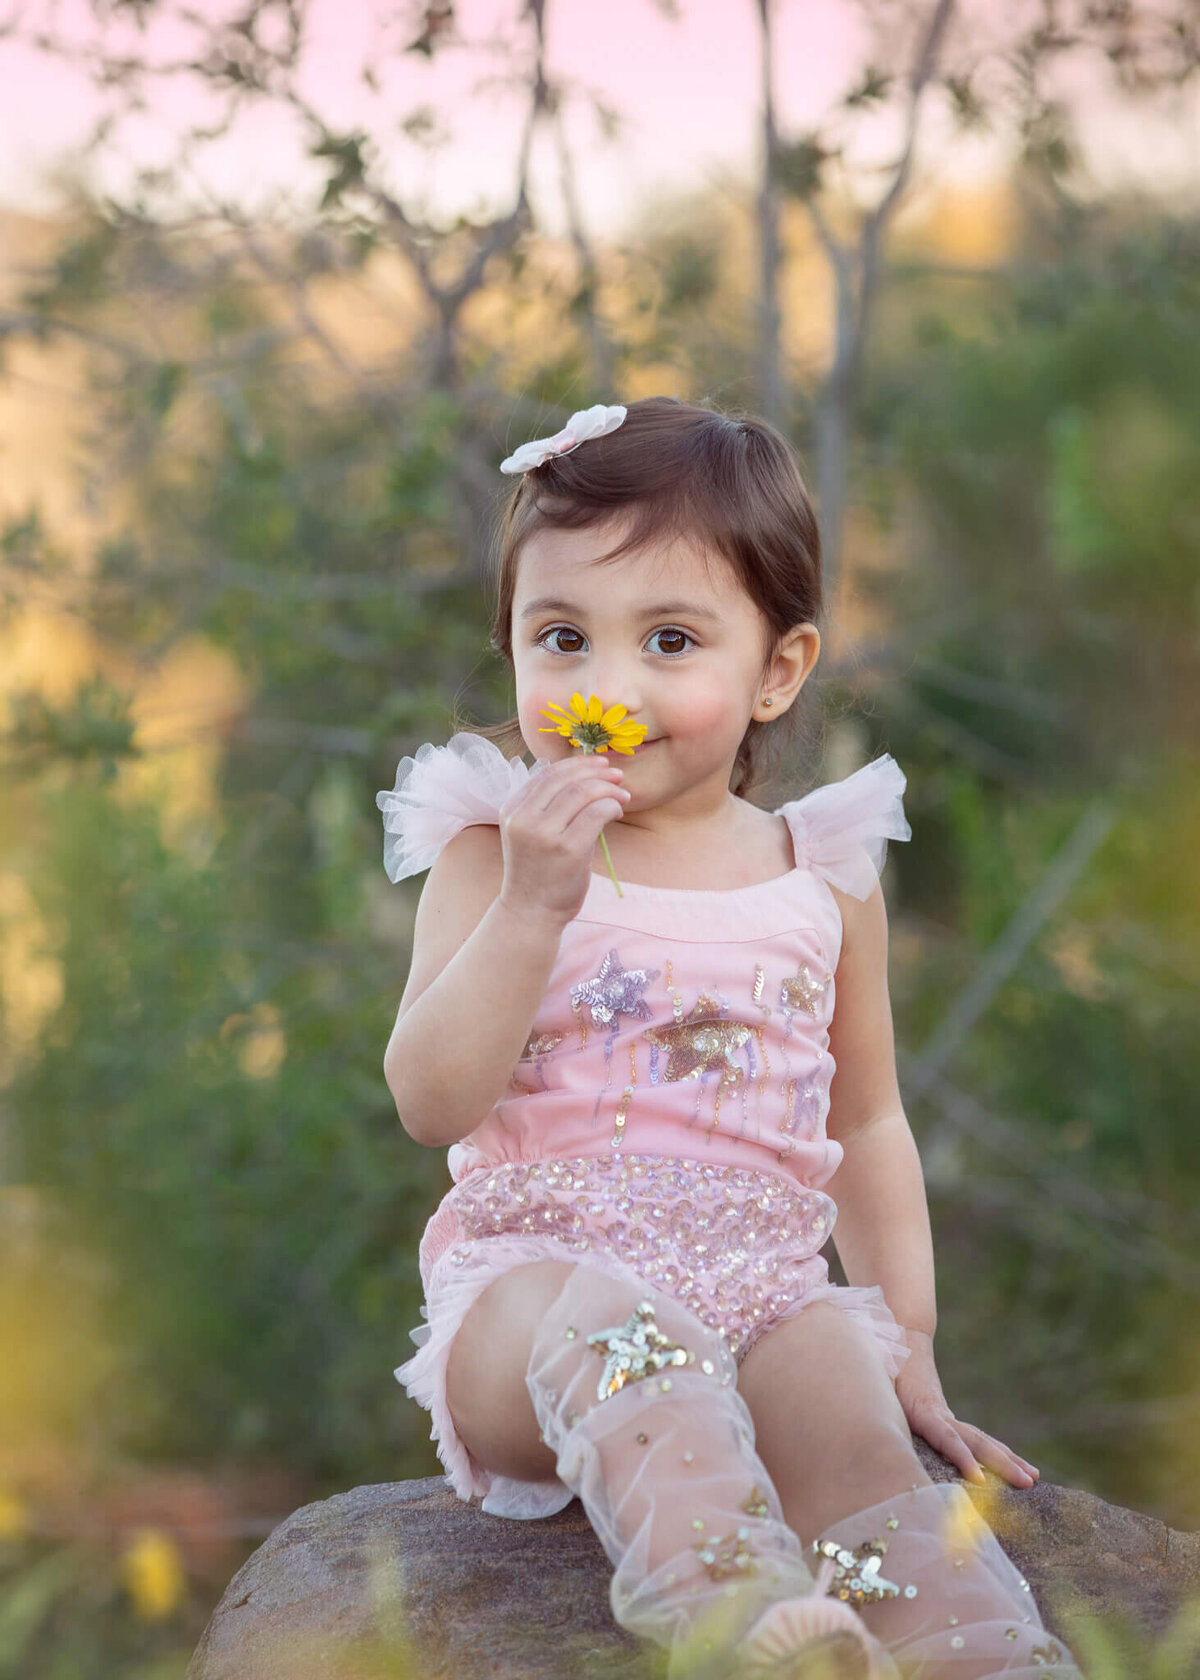 Little girl smelling flowers at the park wearing a pink tutu du monde outfit - Los Angeles Children’s Photographer